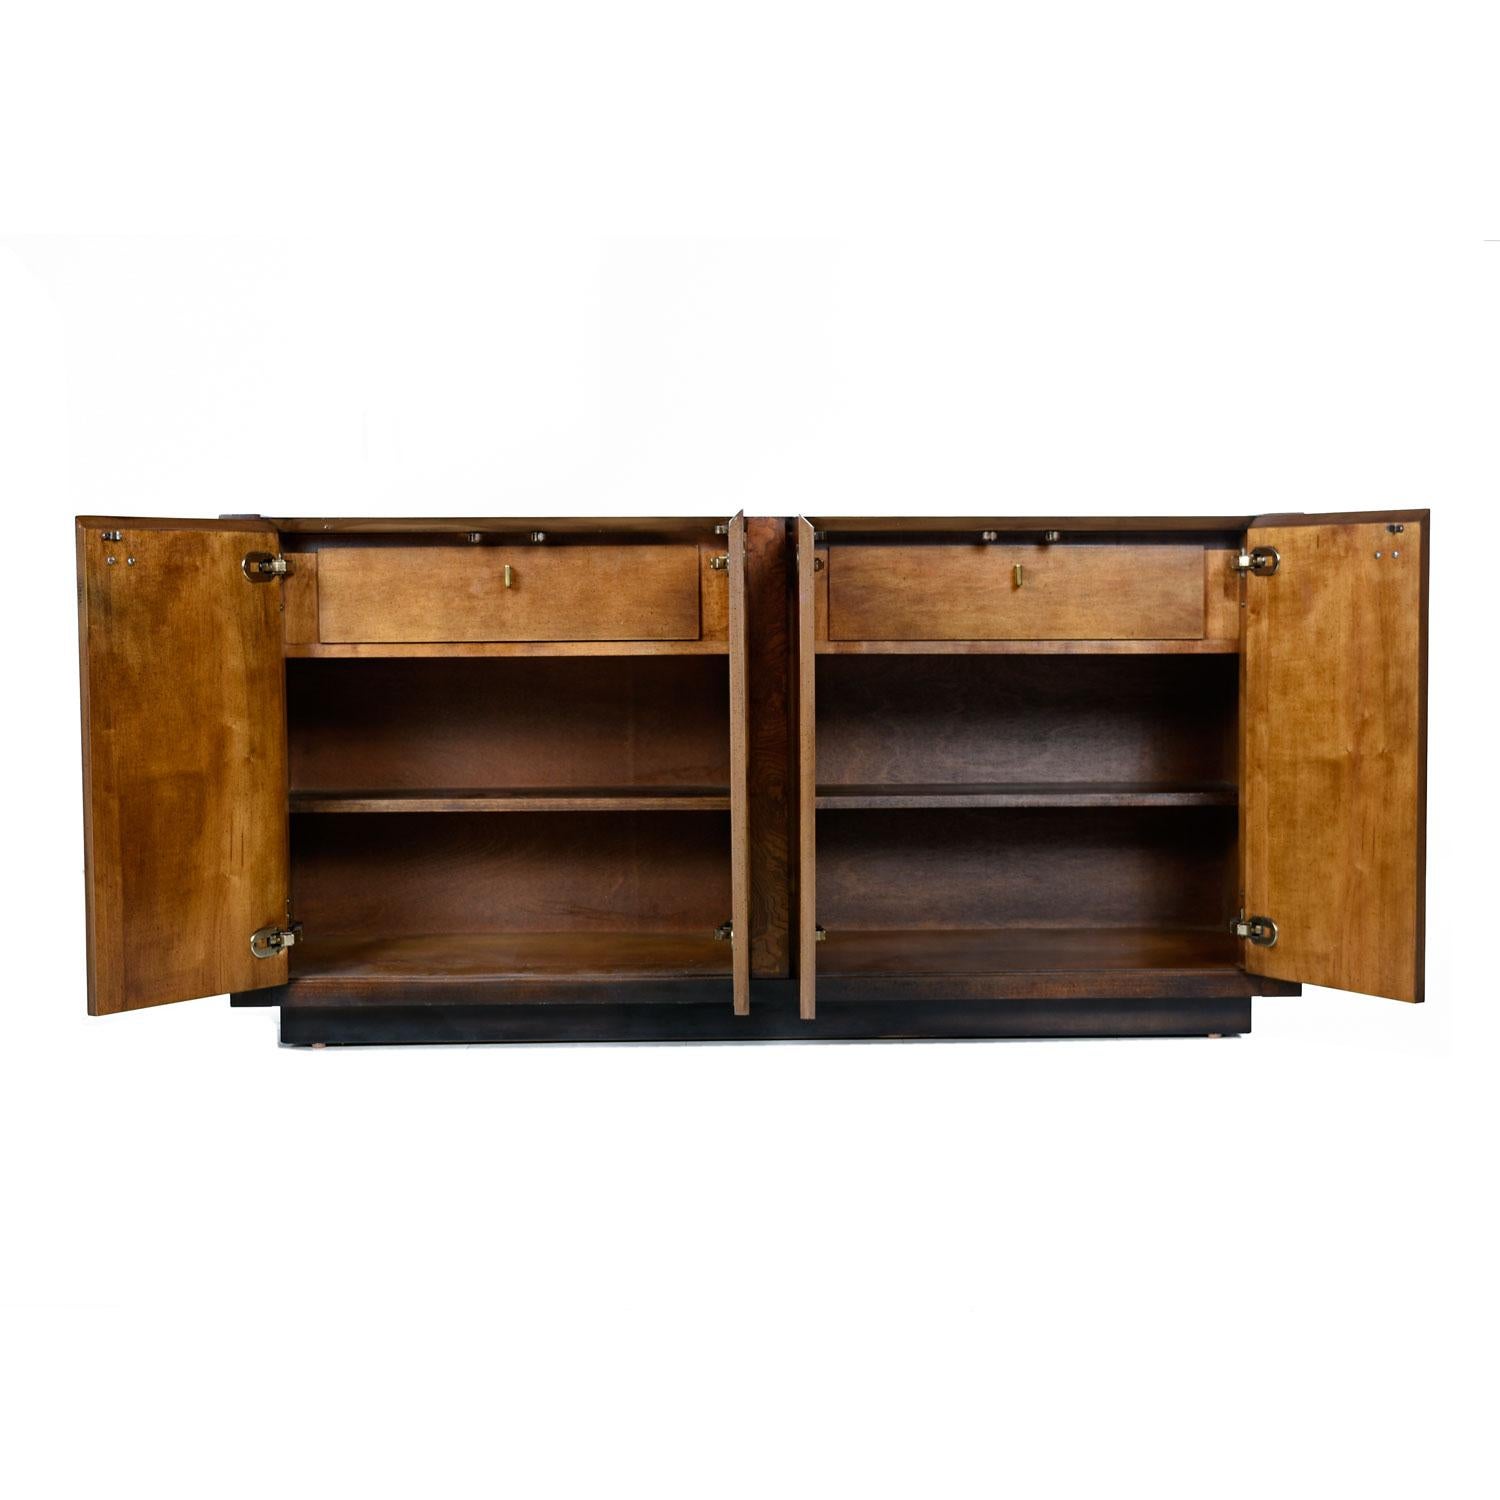 Hollywood Regency Century Furniture Campaign Style Brass Accent Burl Wood Credenza Cabinet